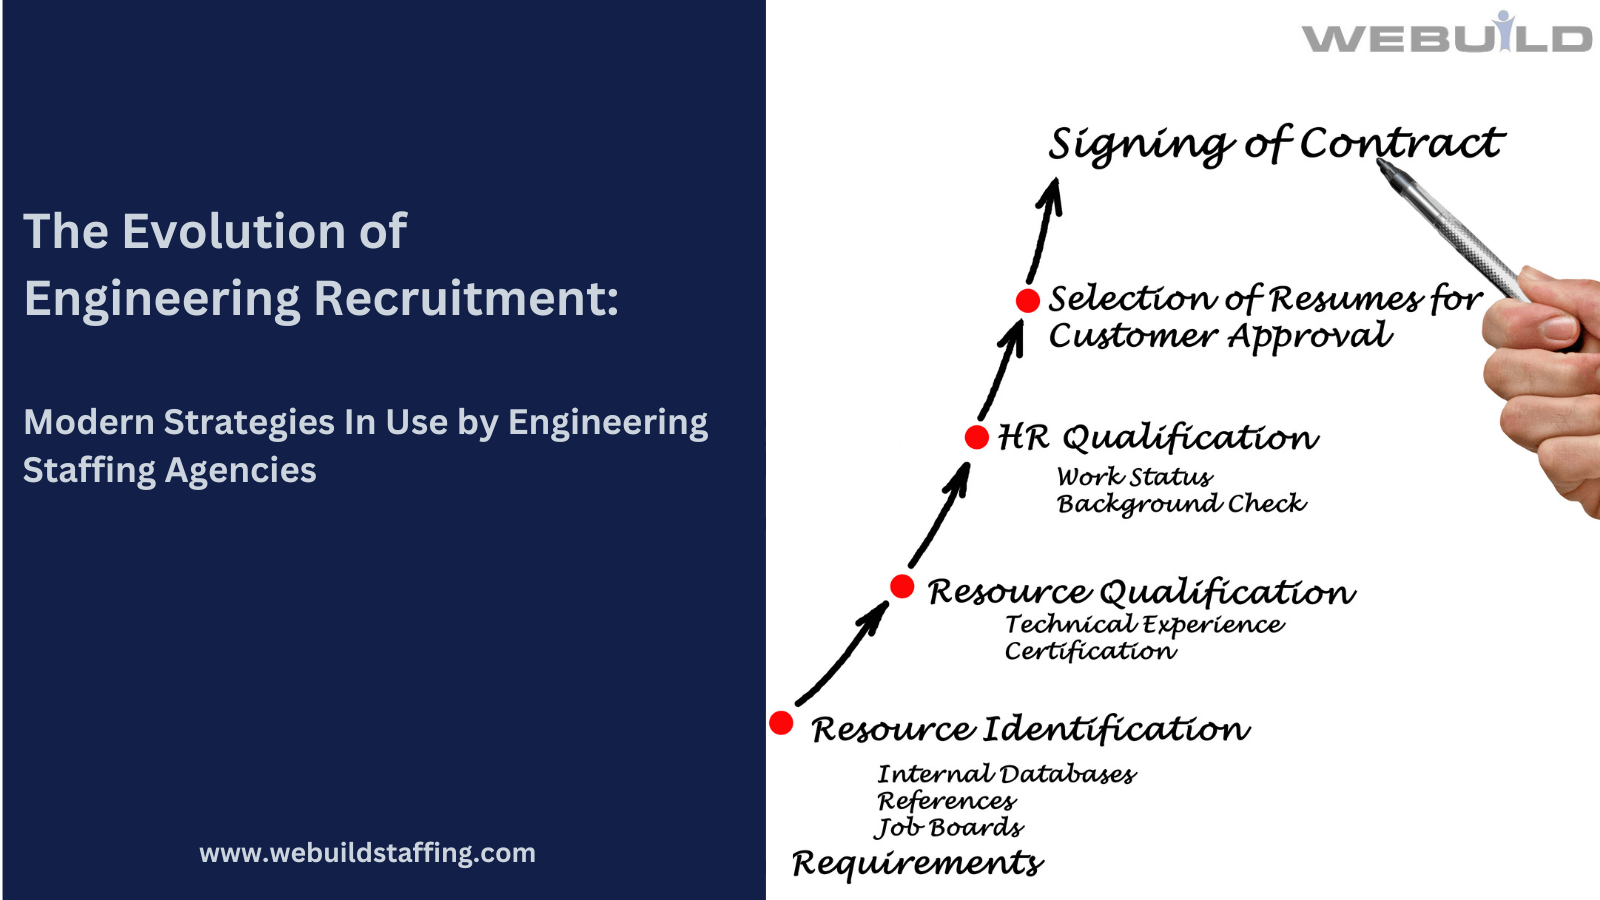 the-evolution-of-engineering-recruitment:-modern-strategies-by-staffing-agencies